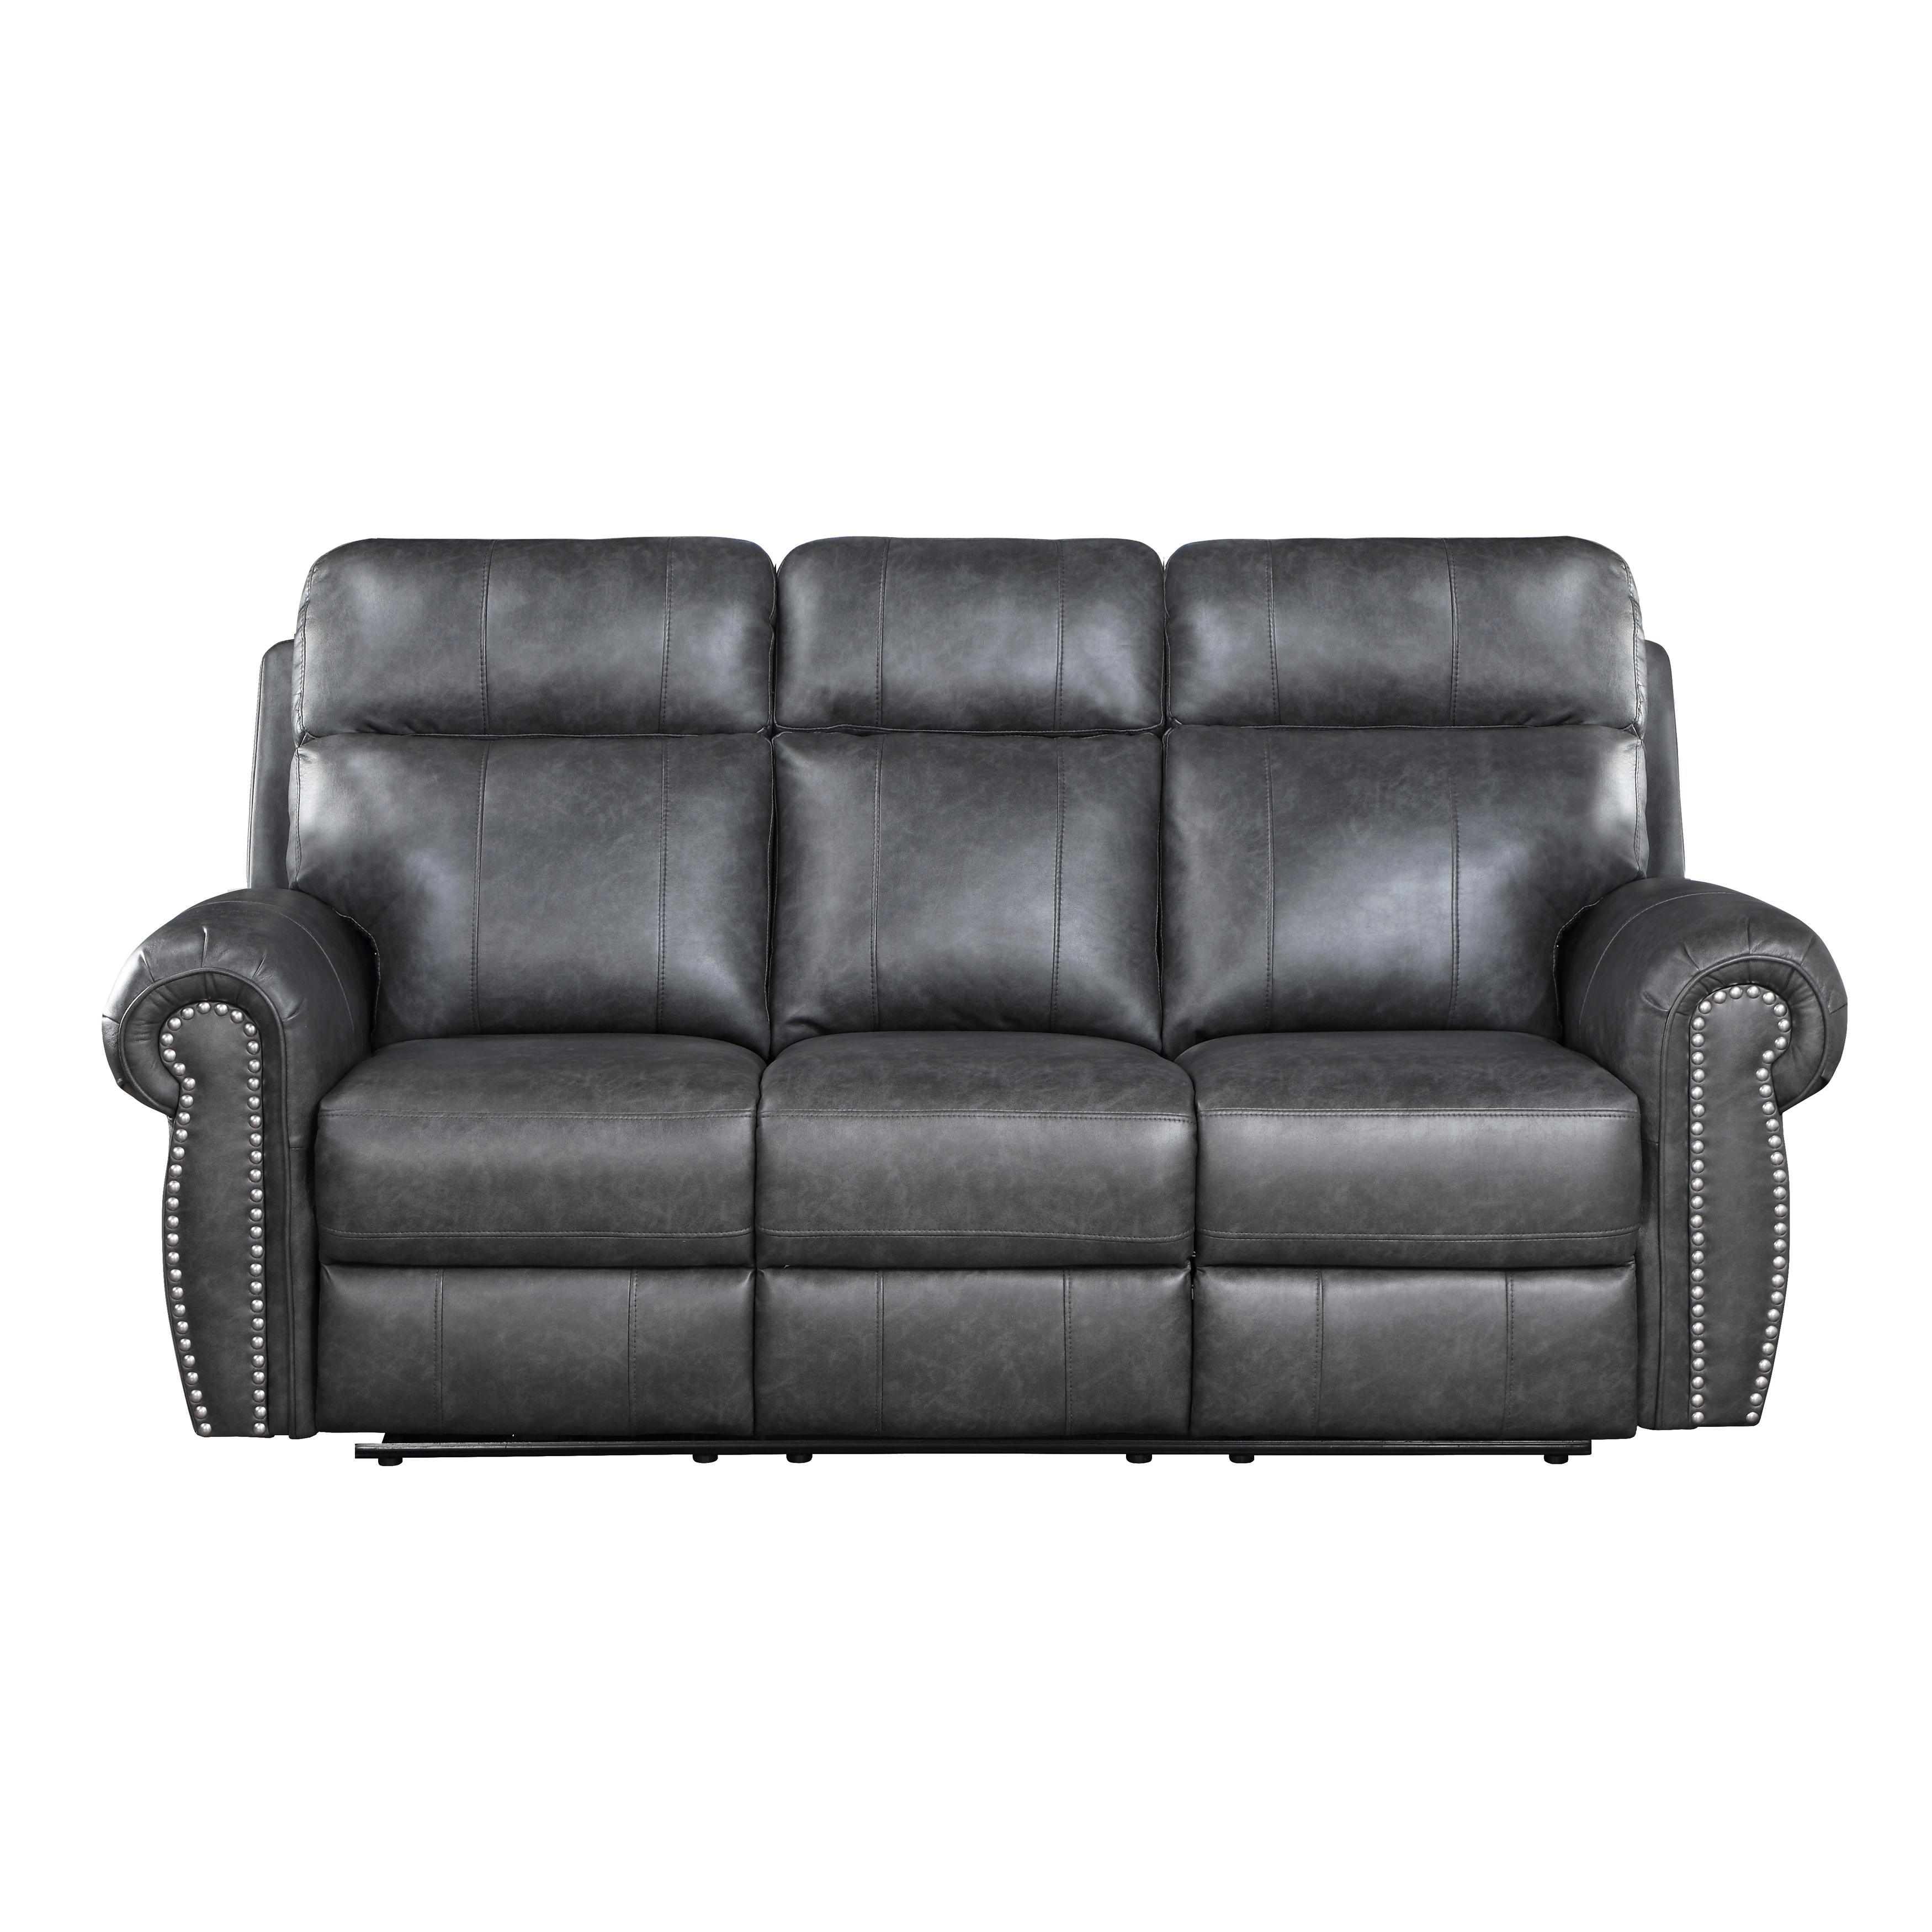 Transitional Power Reclining Sofa 9488GY-3PW Granville 9488GY-3PW in Gray Suede